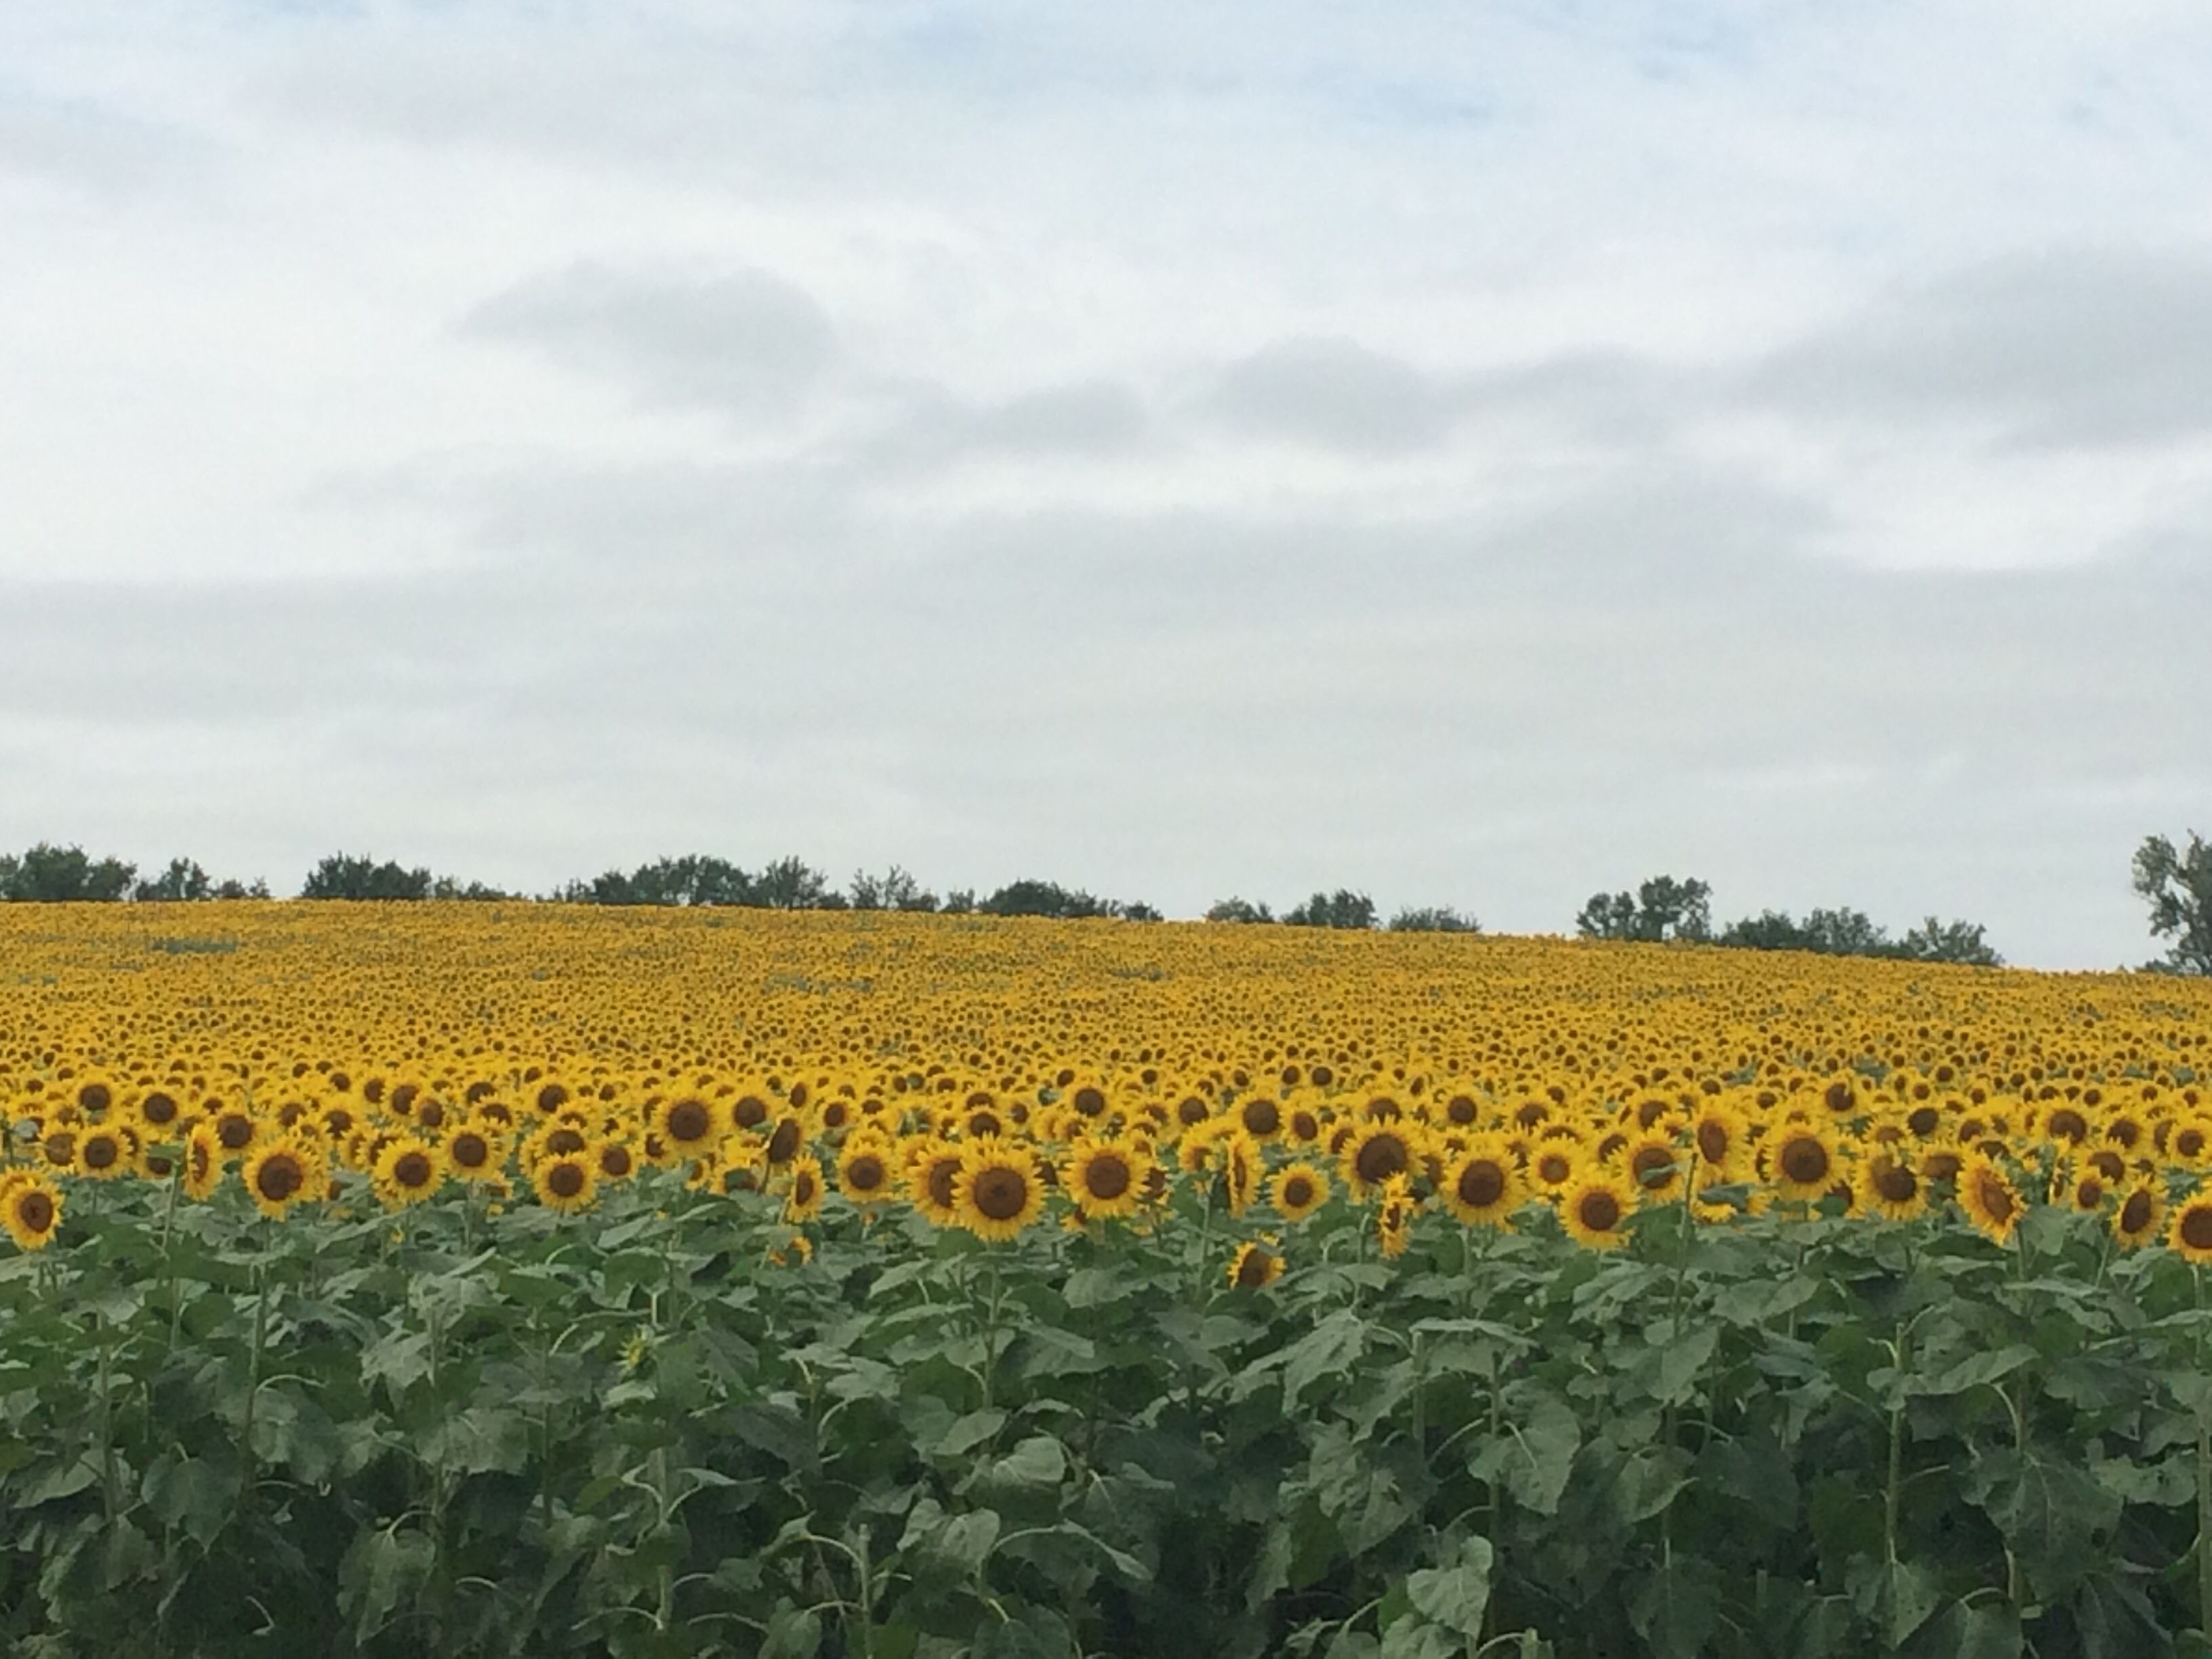 Visit a field filled with sunflowers in the late summer heat Grinter ...